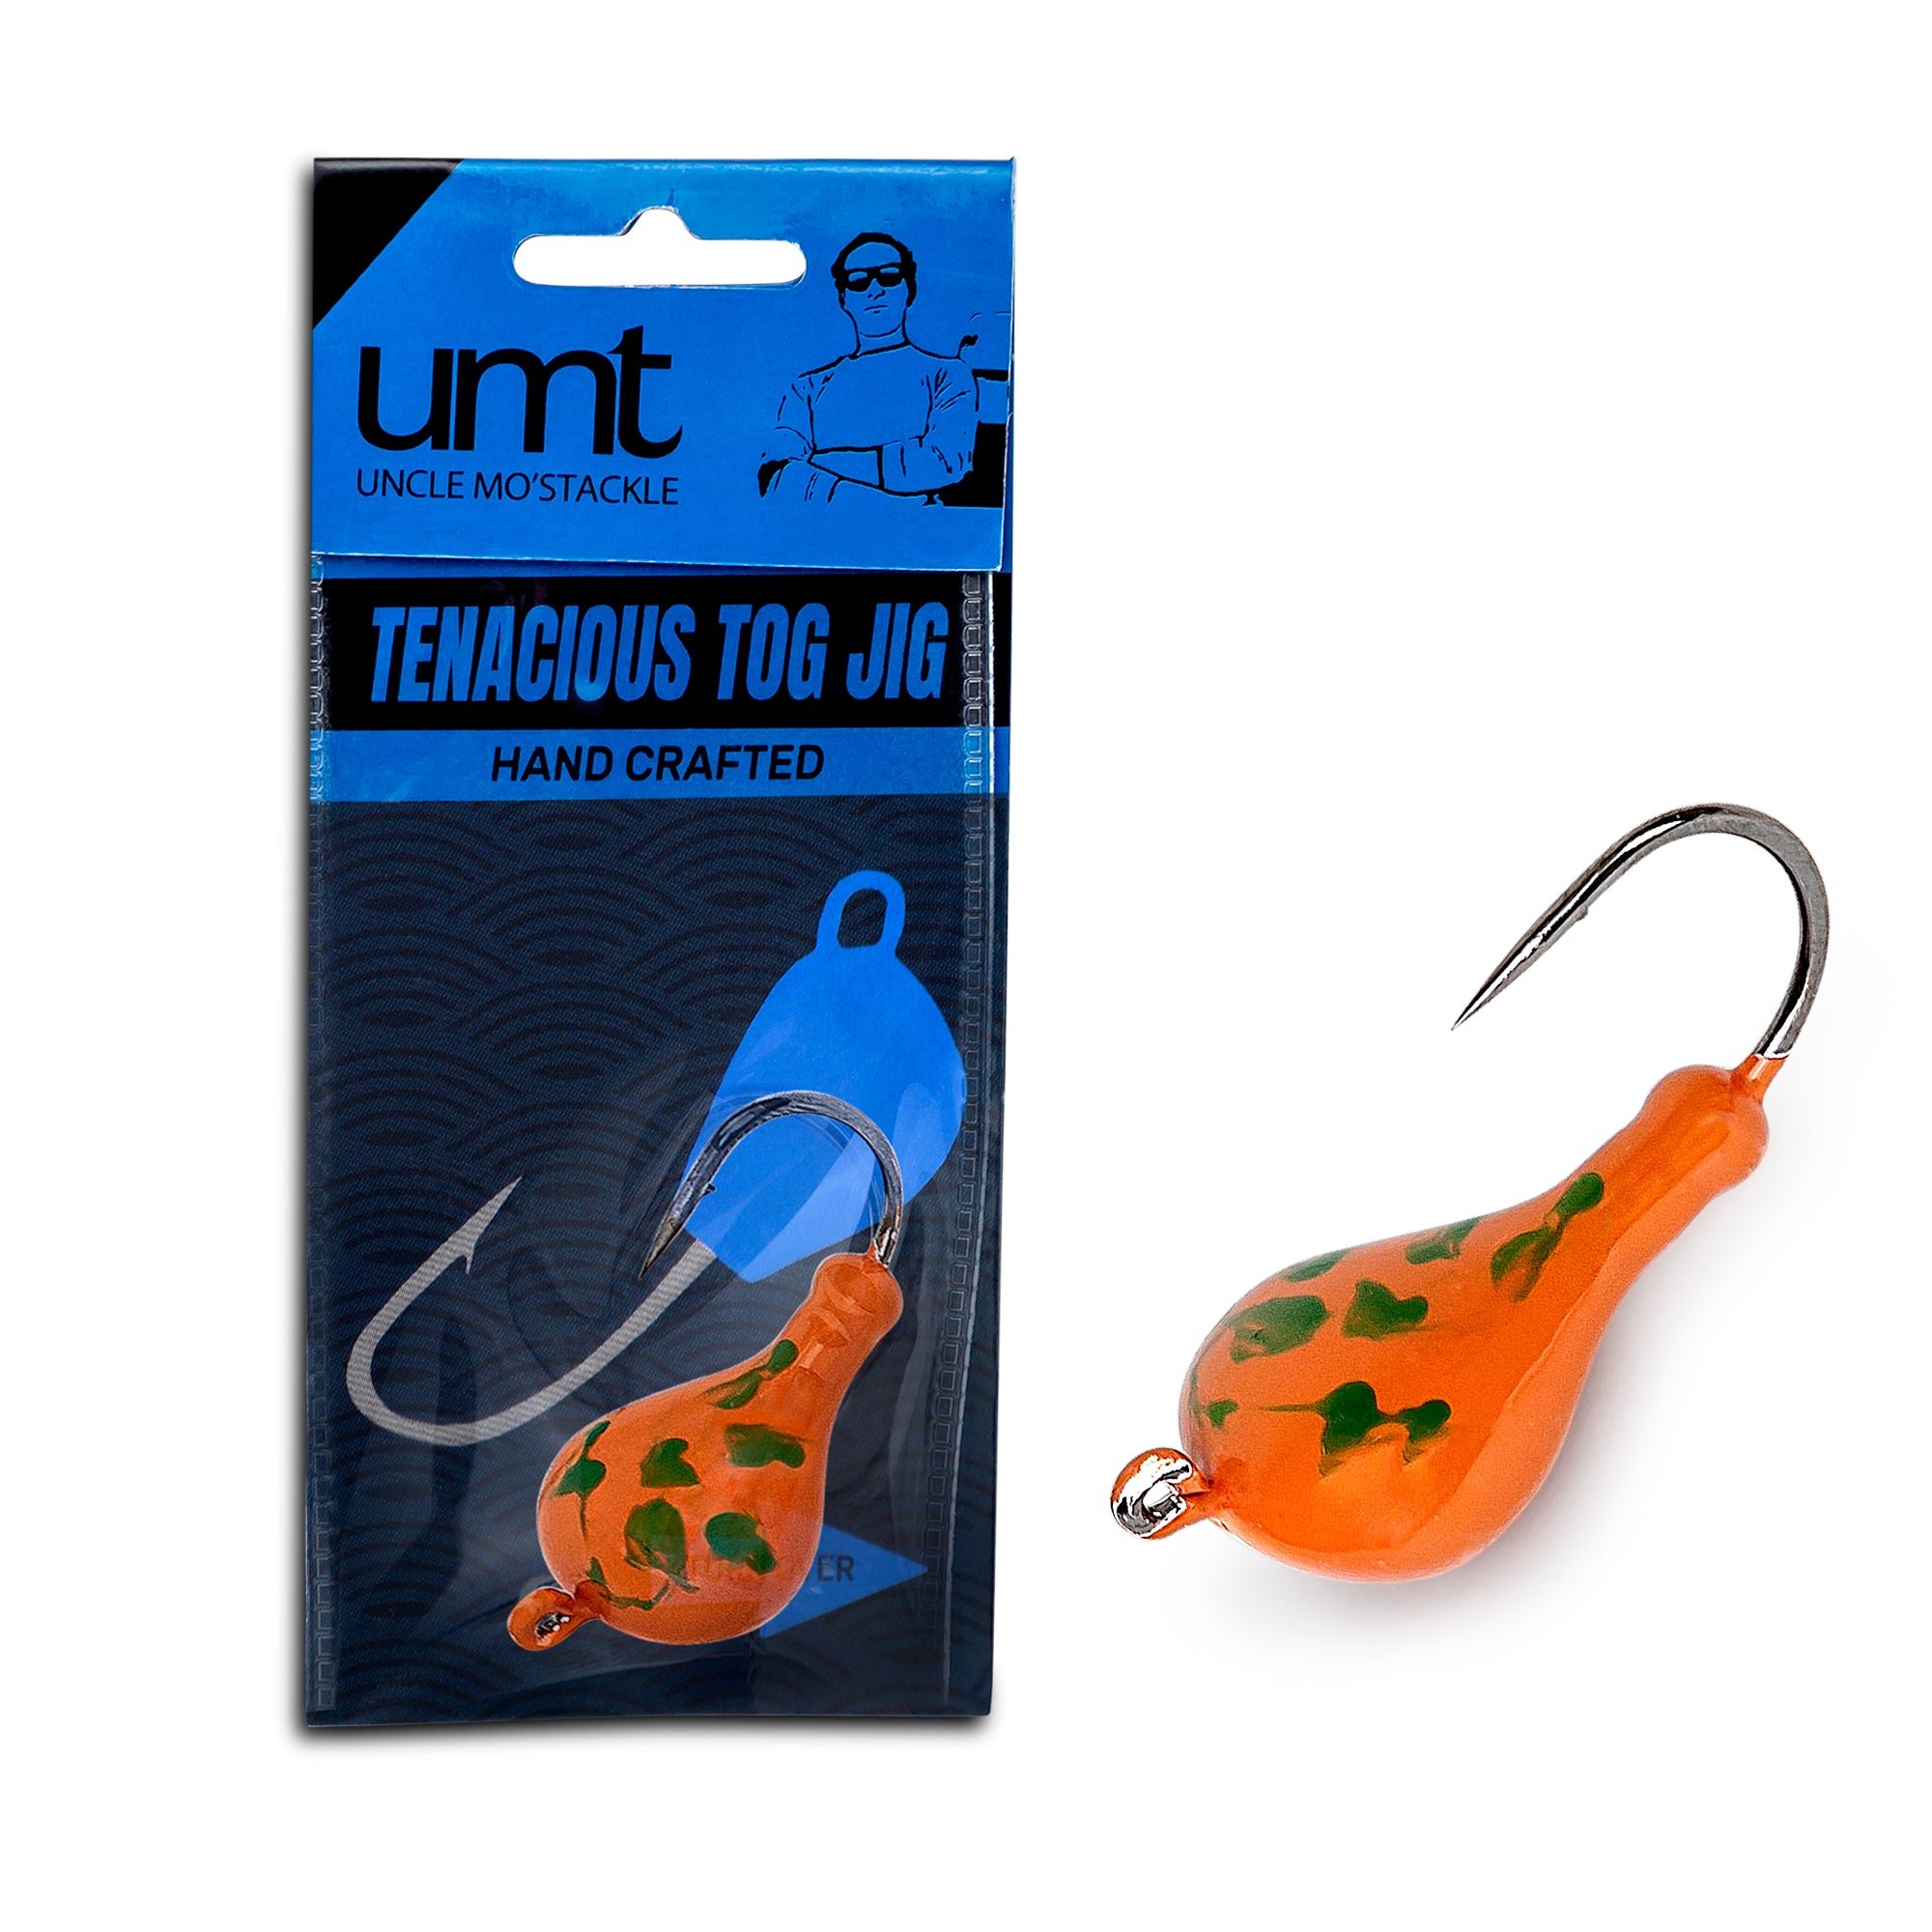  Uncle Mo's Tackle - Fluke Flounder Ocean Hi-Lo Rig – Charteuse  BUCKTAIL Teaser Hook for Saltwater – Size 5/0 Hook - 40lb Heavy Duty Mono  3ft Long - Black Duo-Lock